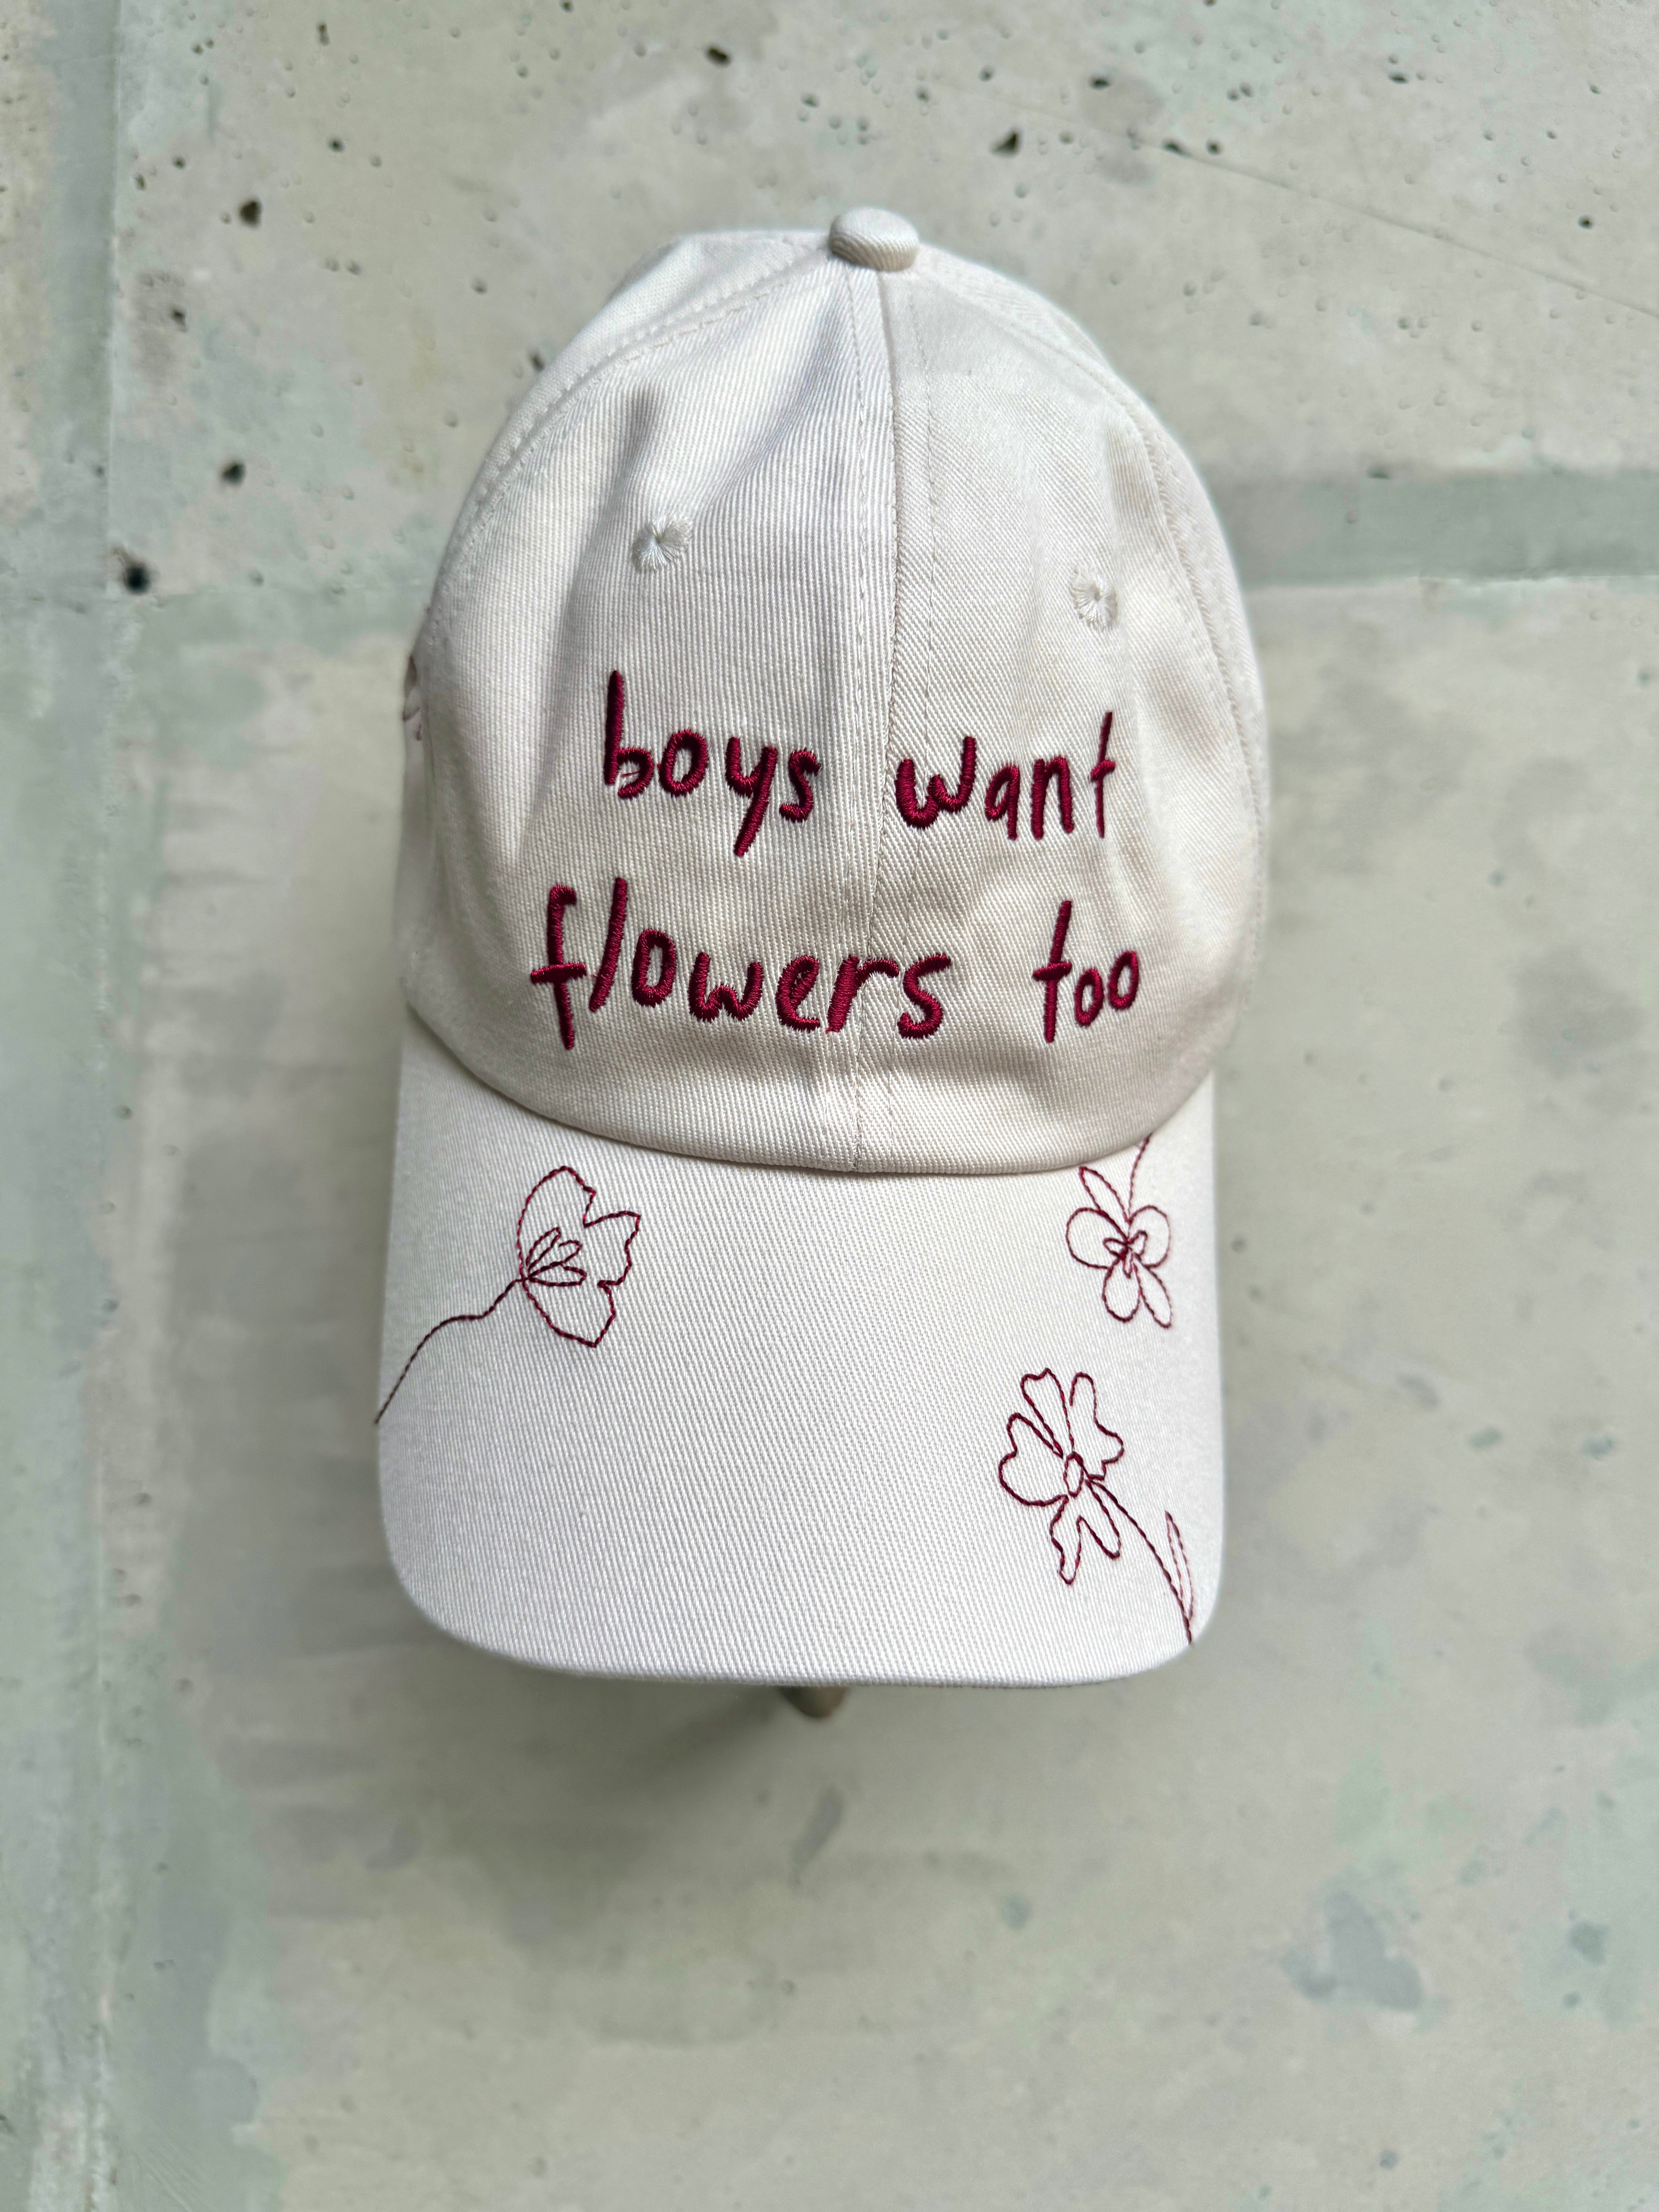 "BOYS WANT FLOWERS TOO"